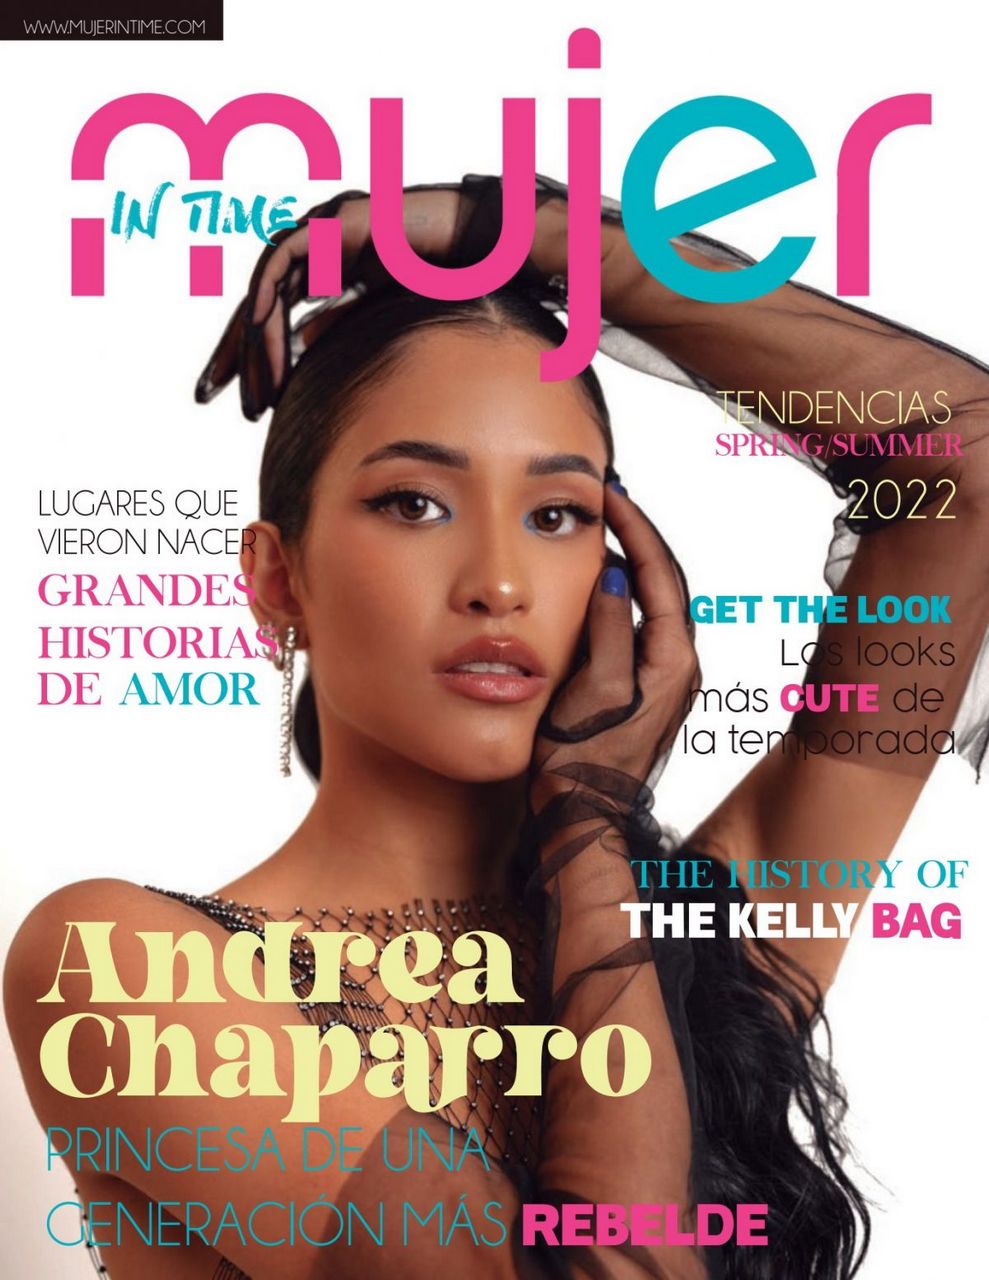 Andrea Chaparro For Mujer Time Magazine February